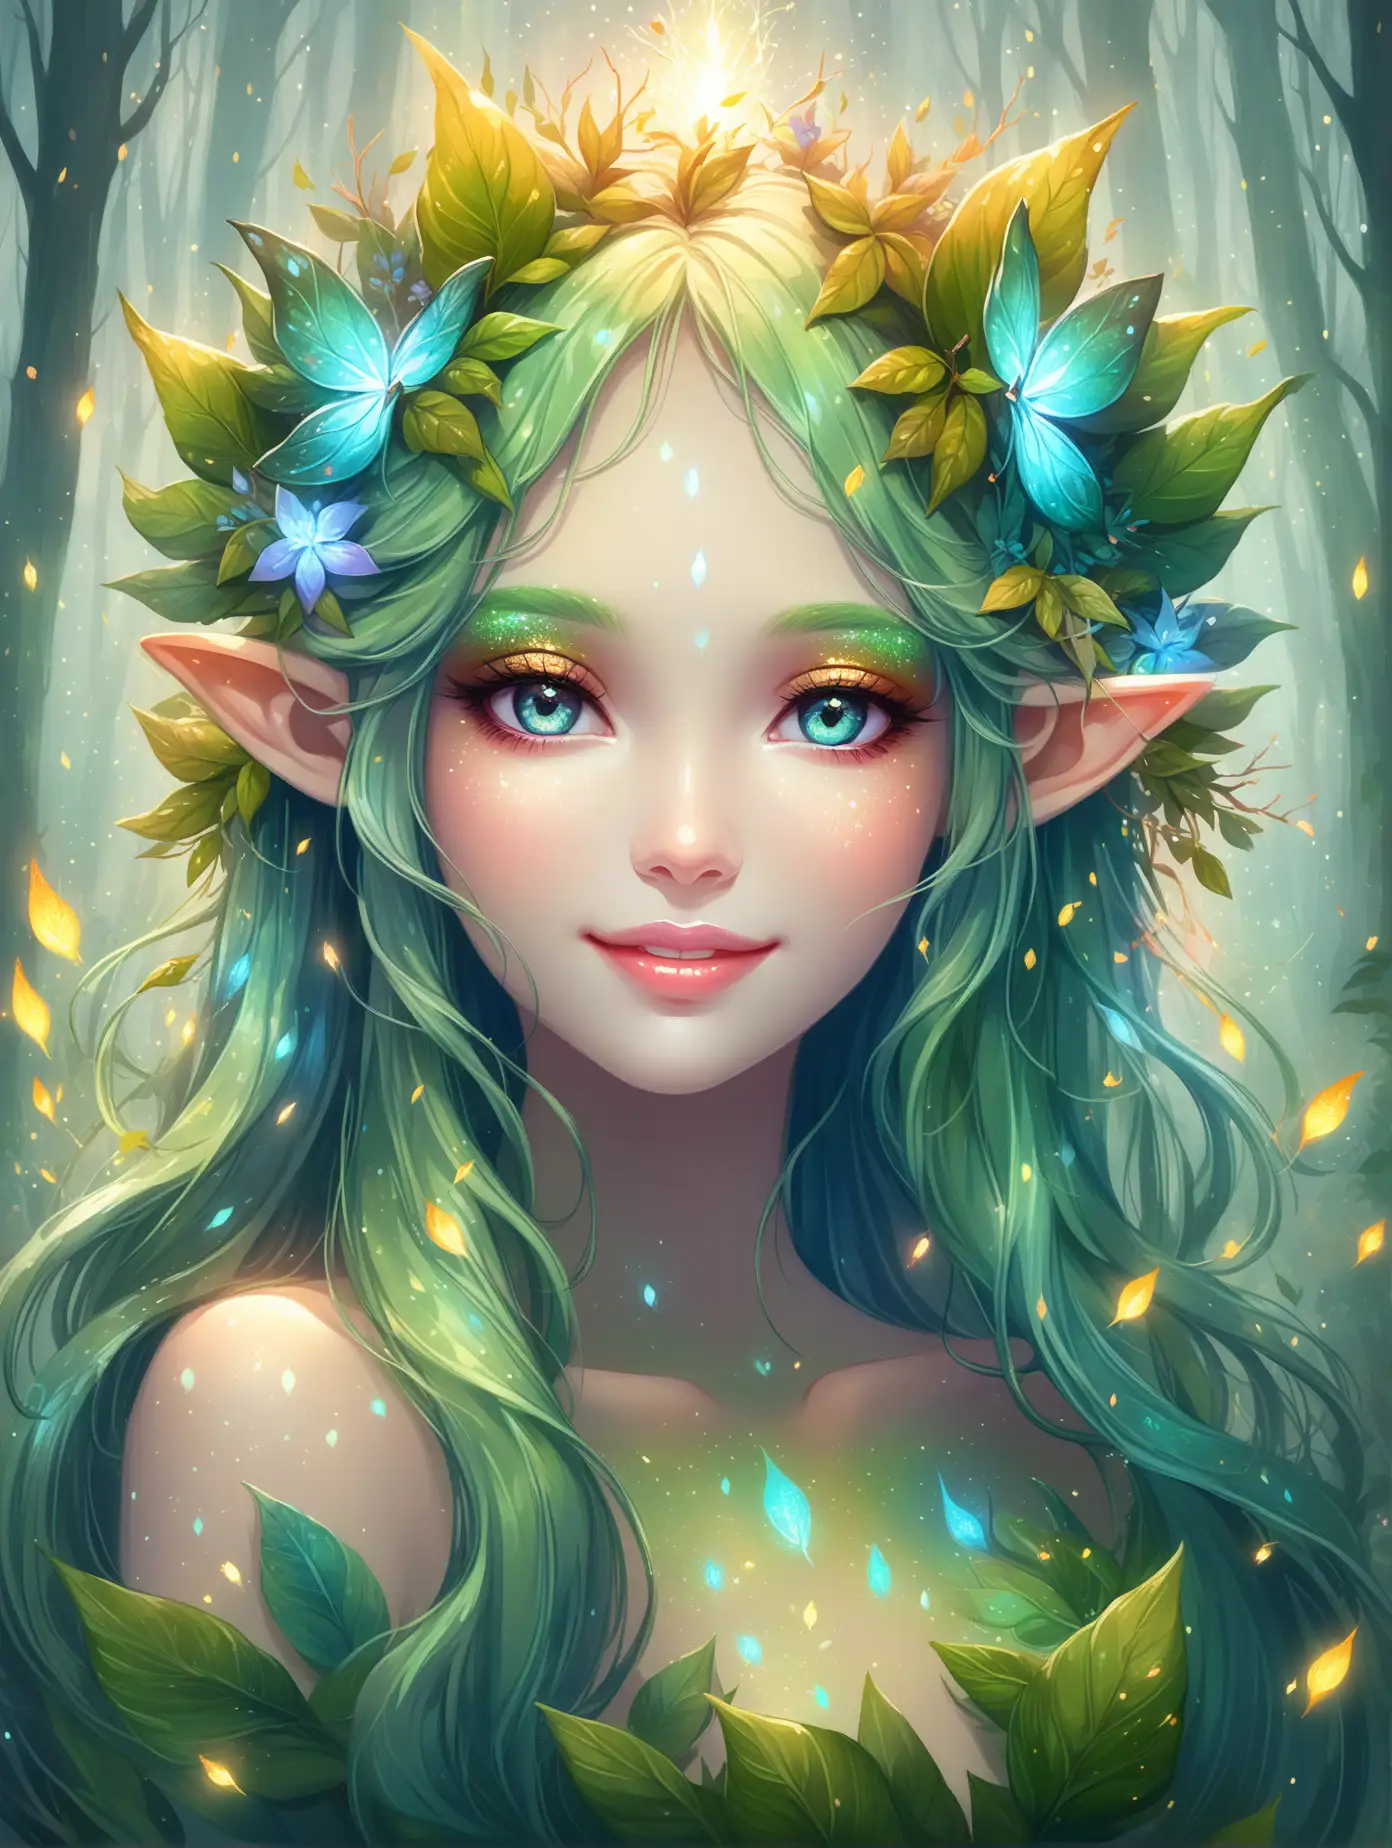 Enchanting Forest Nymph Portrait with Ethereal Aura and Shimmering Details